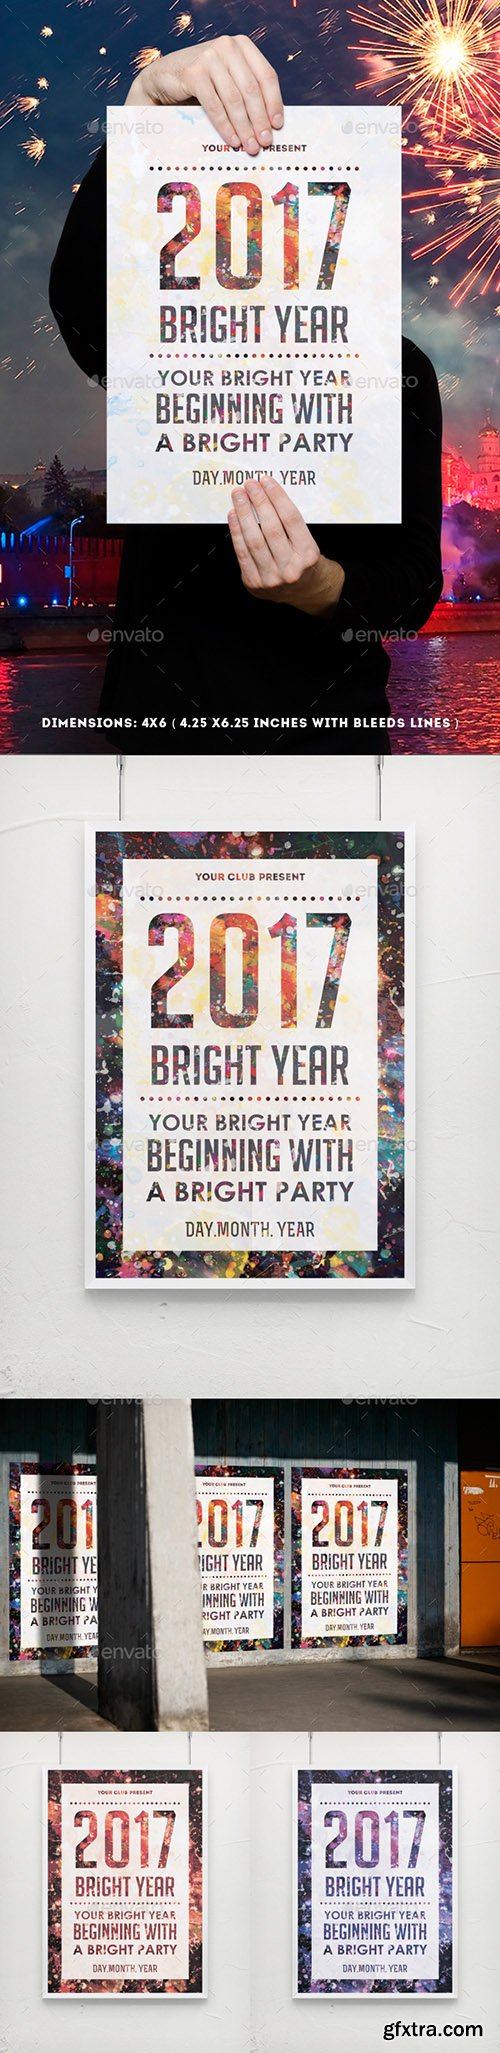 Graphicriver Bright Year Party Poster Flyer Template 13398471